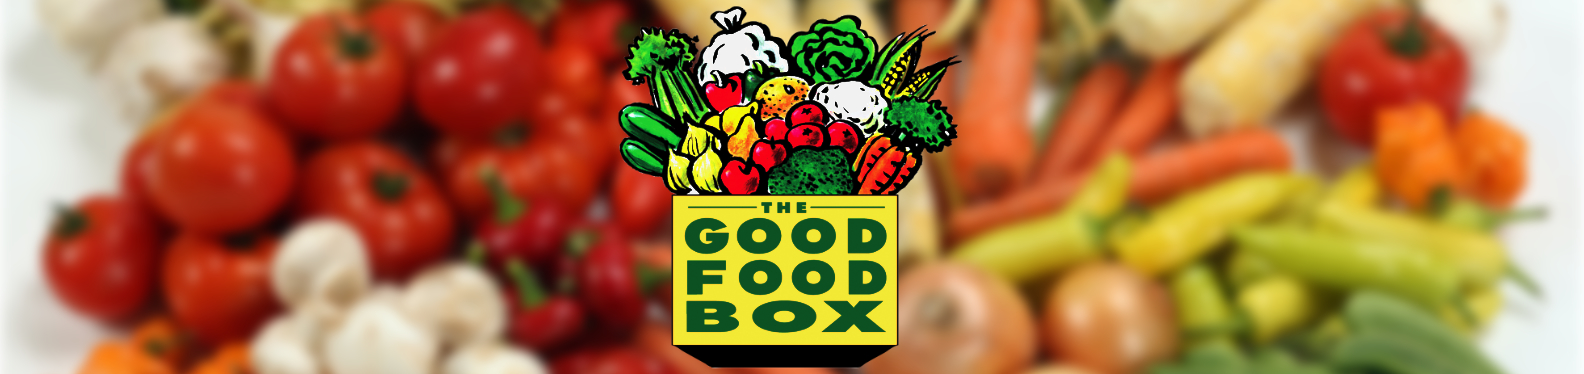 image: fruit and vegetables text: The good food box